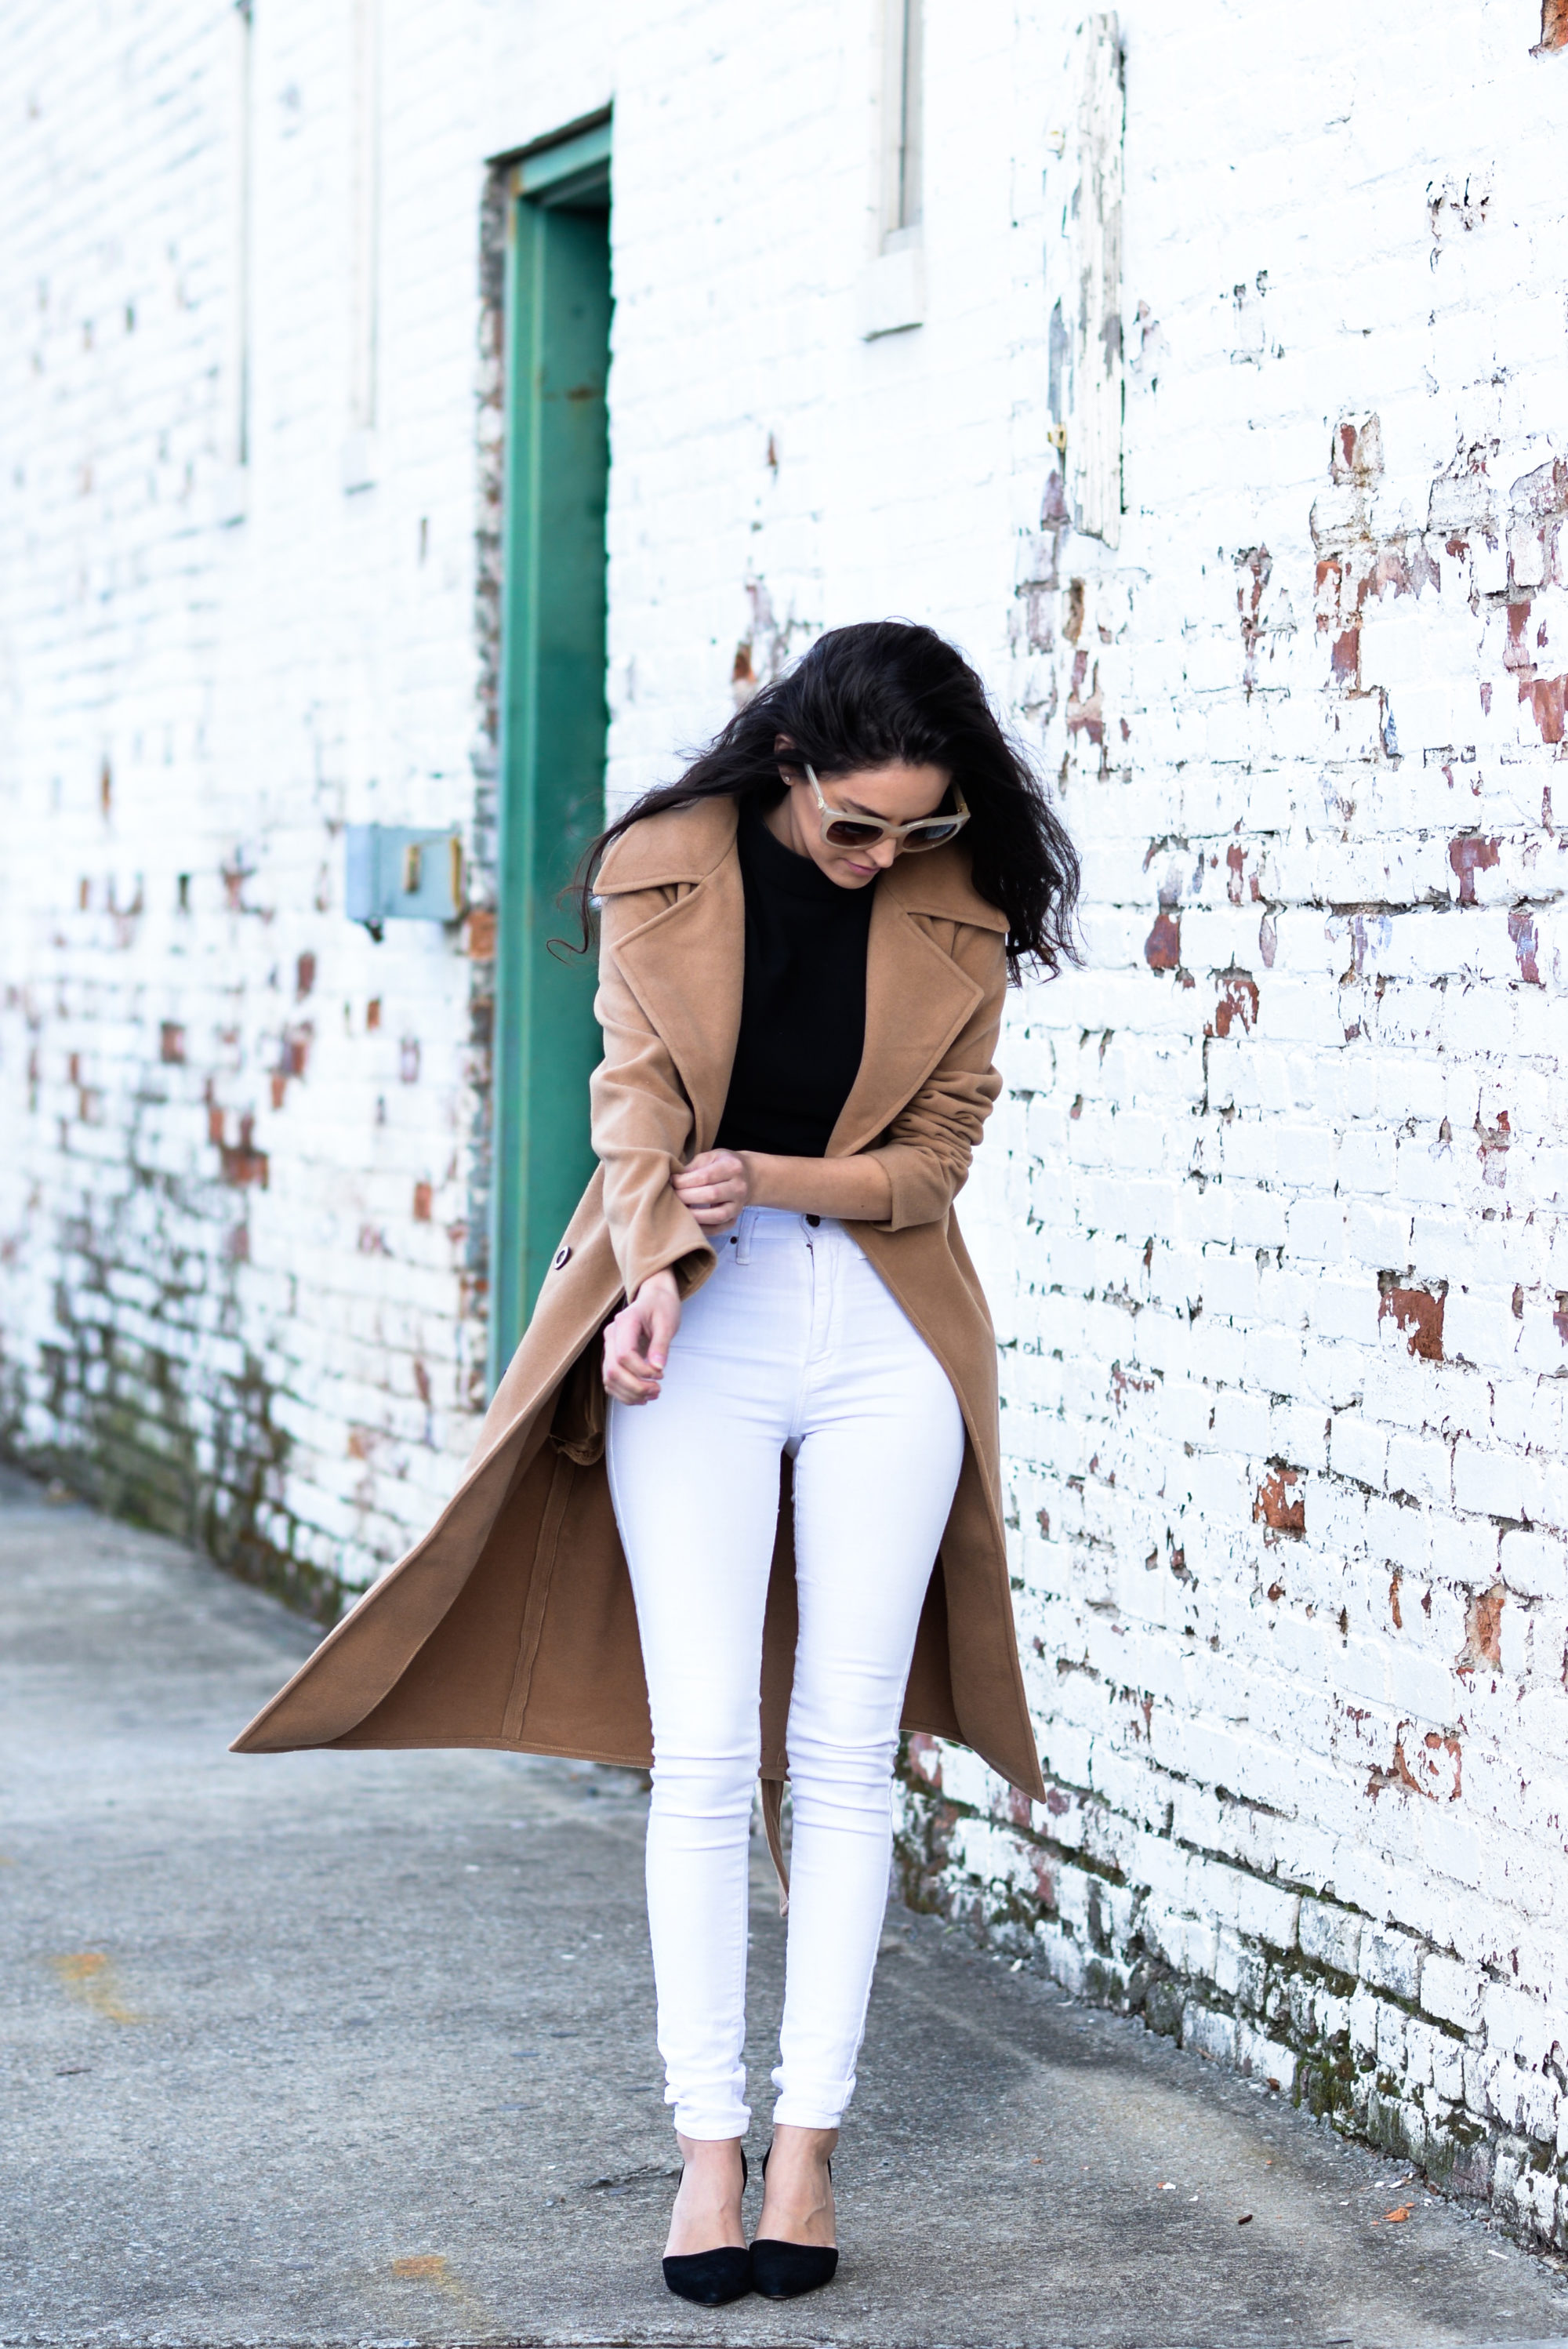 black and white, how to wear black and white, neutral outfit ideas, winter outfit ideas, winter style, classic style, neutrals for winter, likely crop top, white jeans, how to wear white jeans in winter, classic style